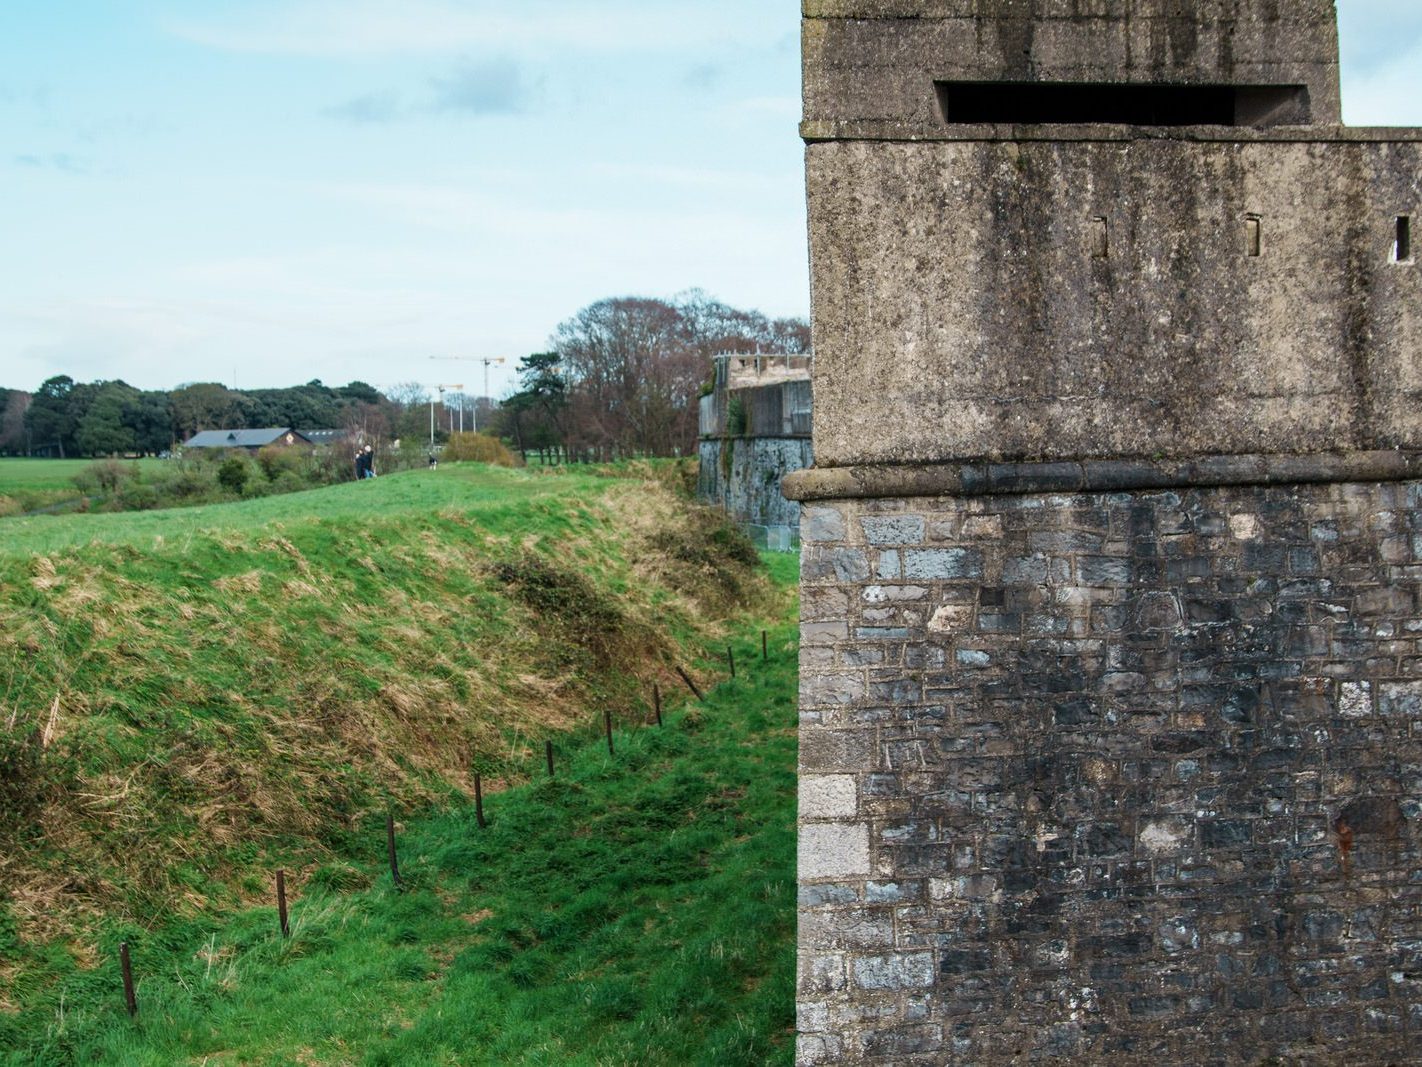 THE MAGAZINE FORT IN PHOENIX PARK [THERE IS MUCH INFORMATION AND A COMPLICATED STORY]-223484-1